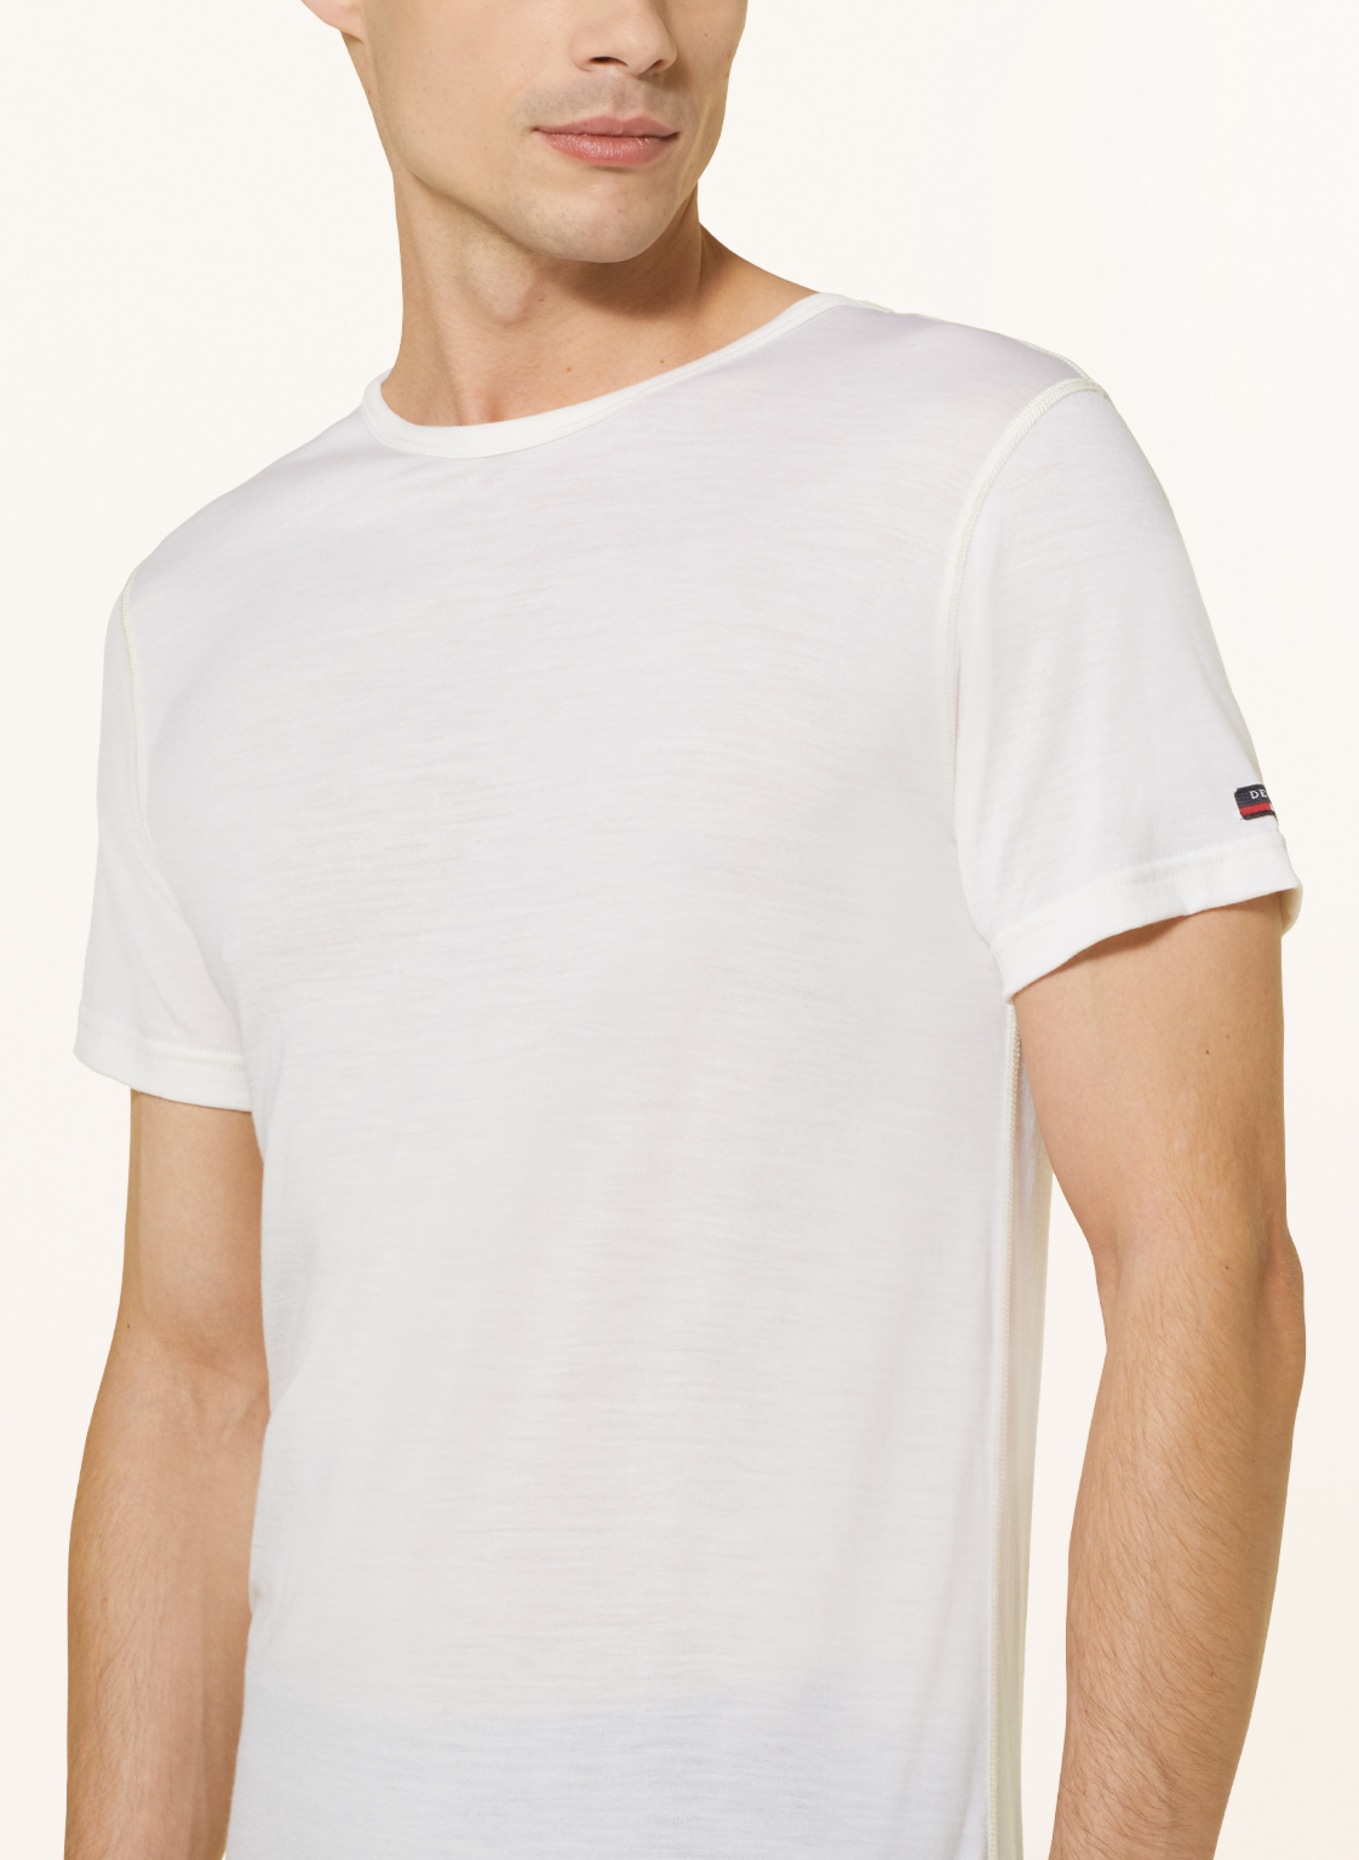 DEVOLD Functional underwear shirt BREEZE made of merino wool, Color: WHITE (Image 4)